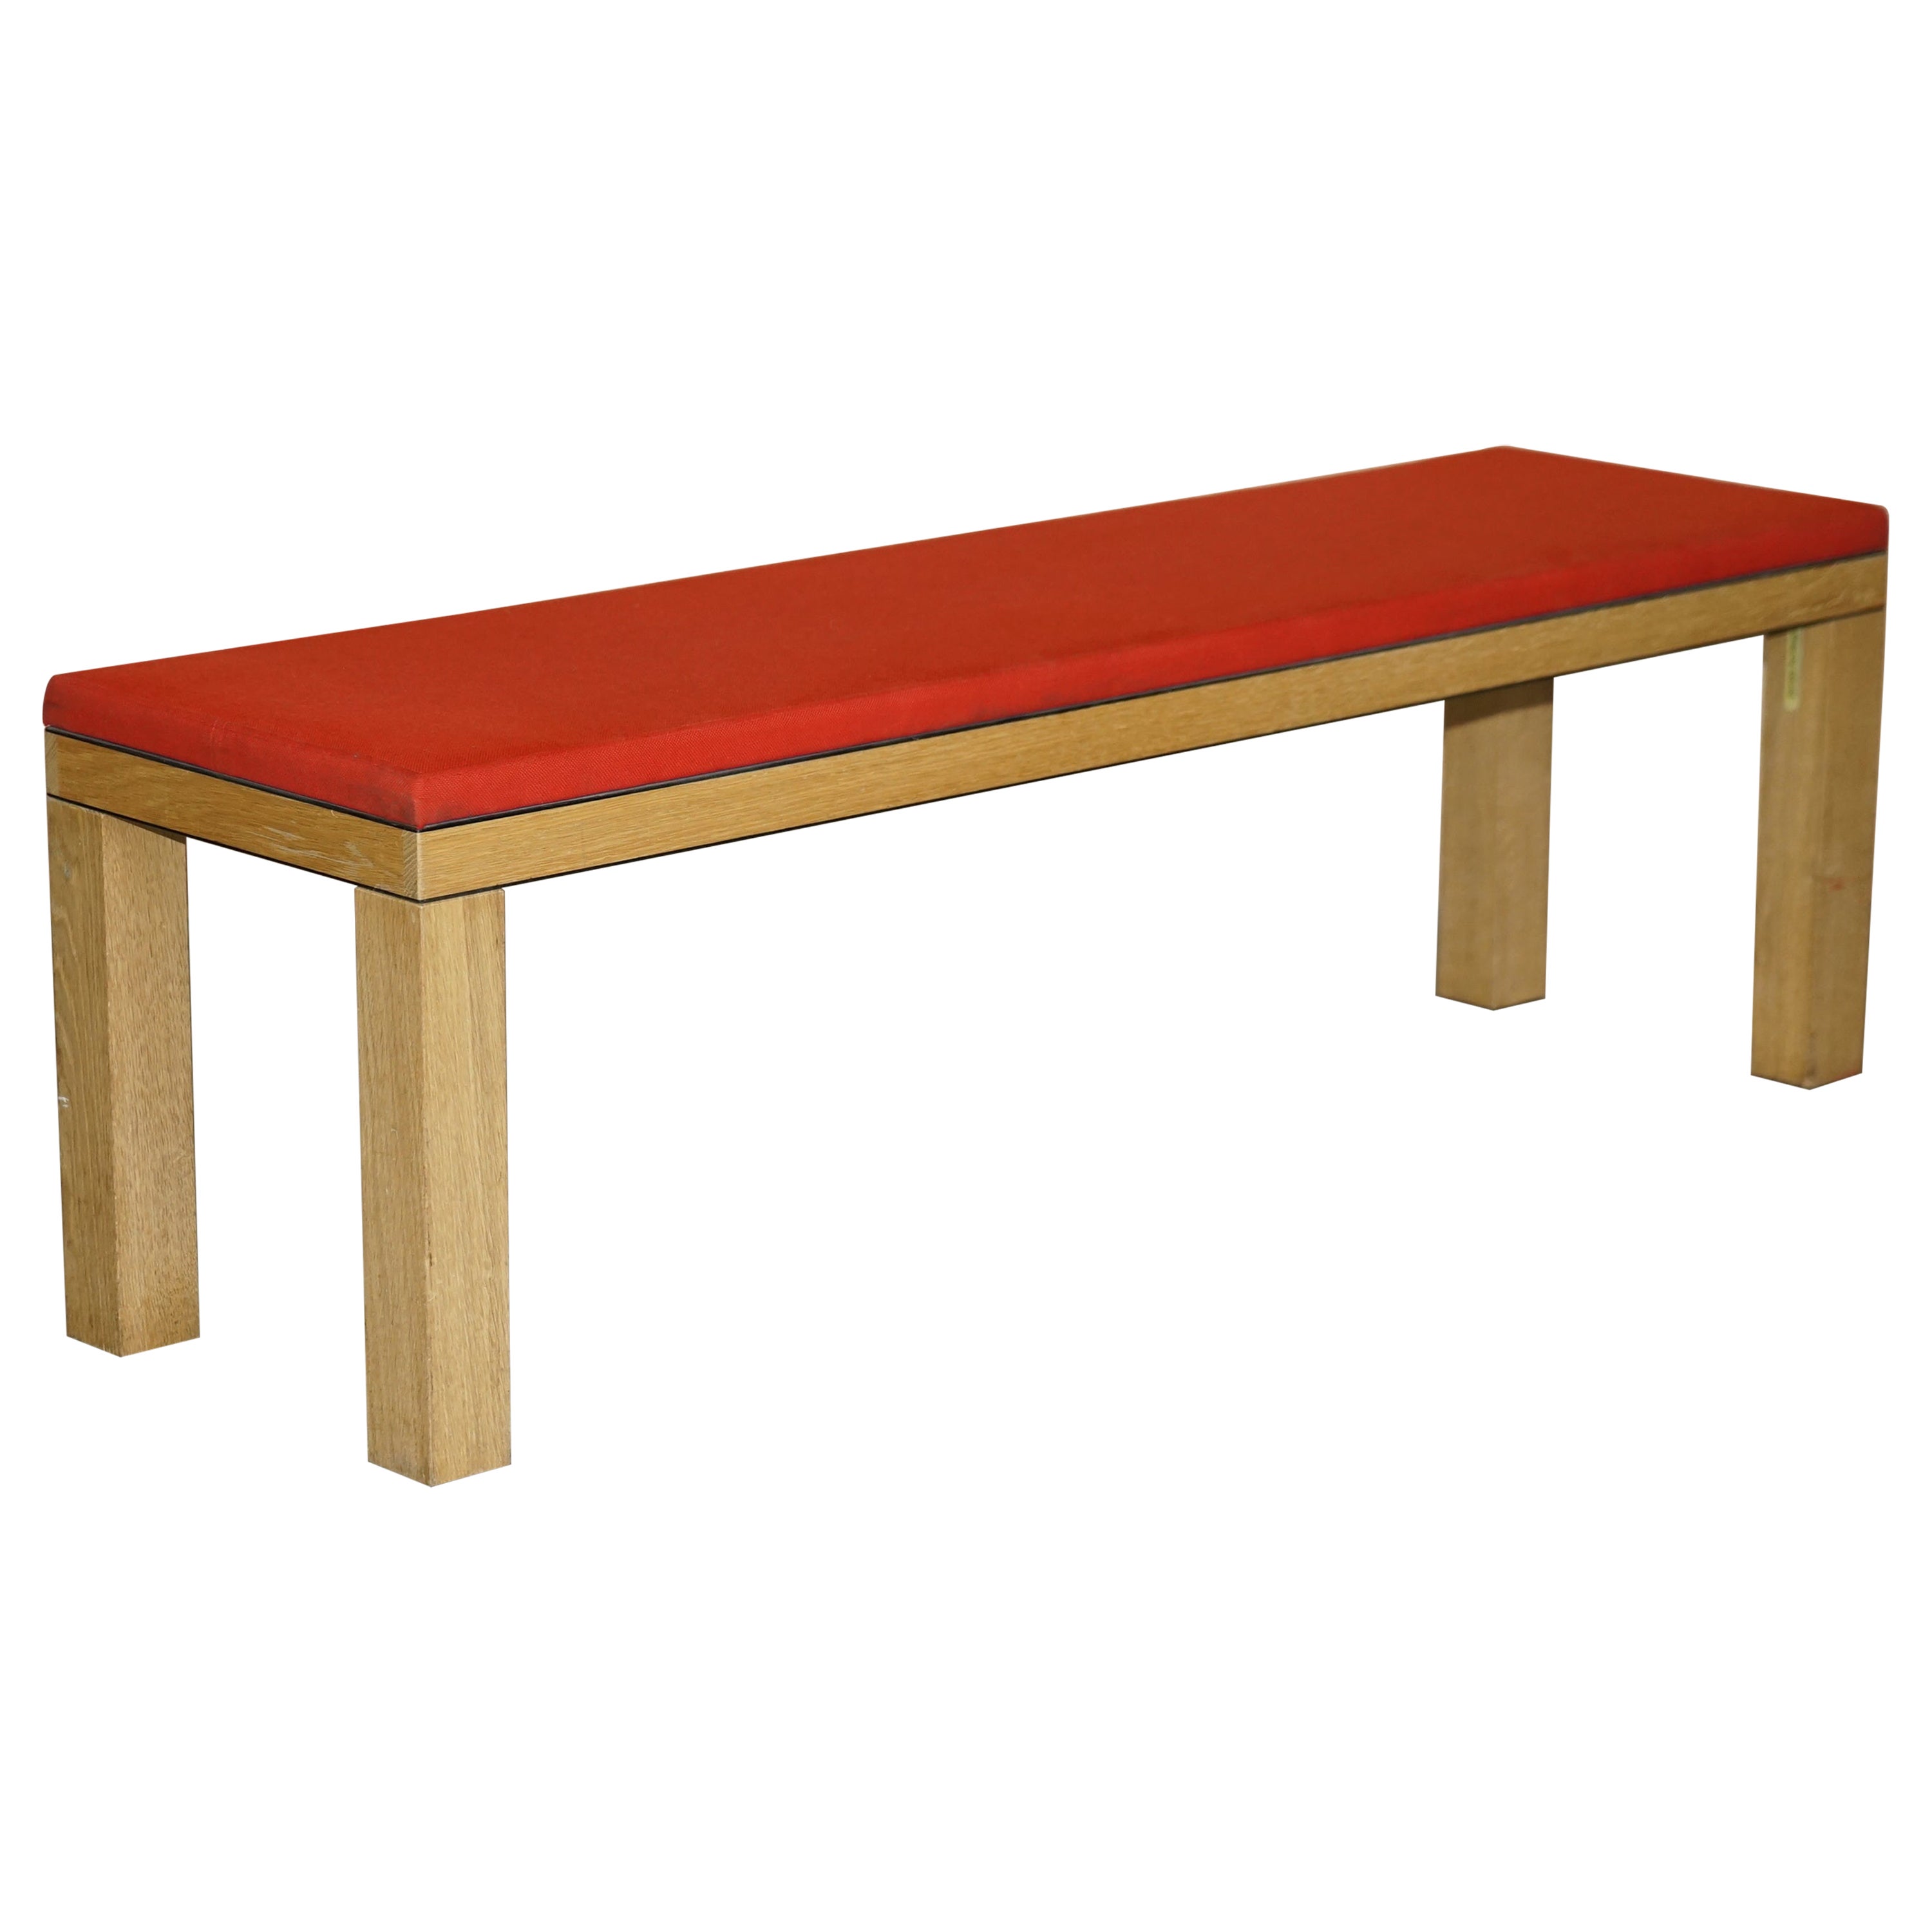 Rrp £1200 James Burleigh Red Large Kitchen Dining Table Bench Sizes & Colours For Sale